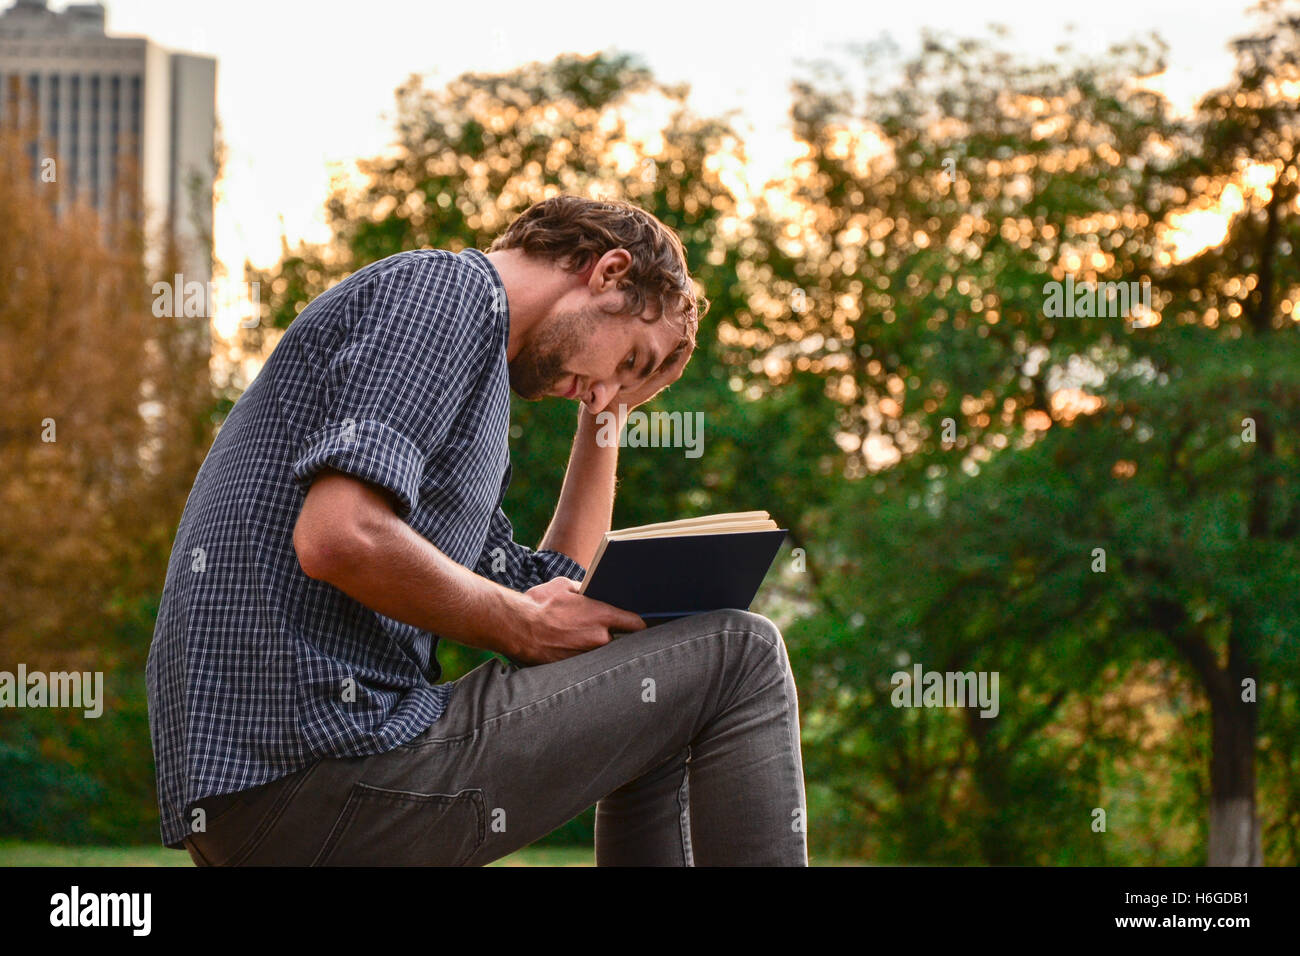 Guy sitting on a bench in the park reading book Stock Photo